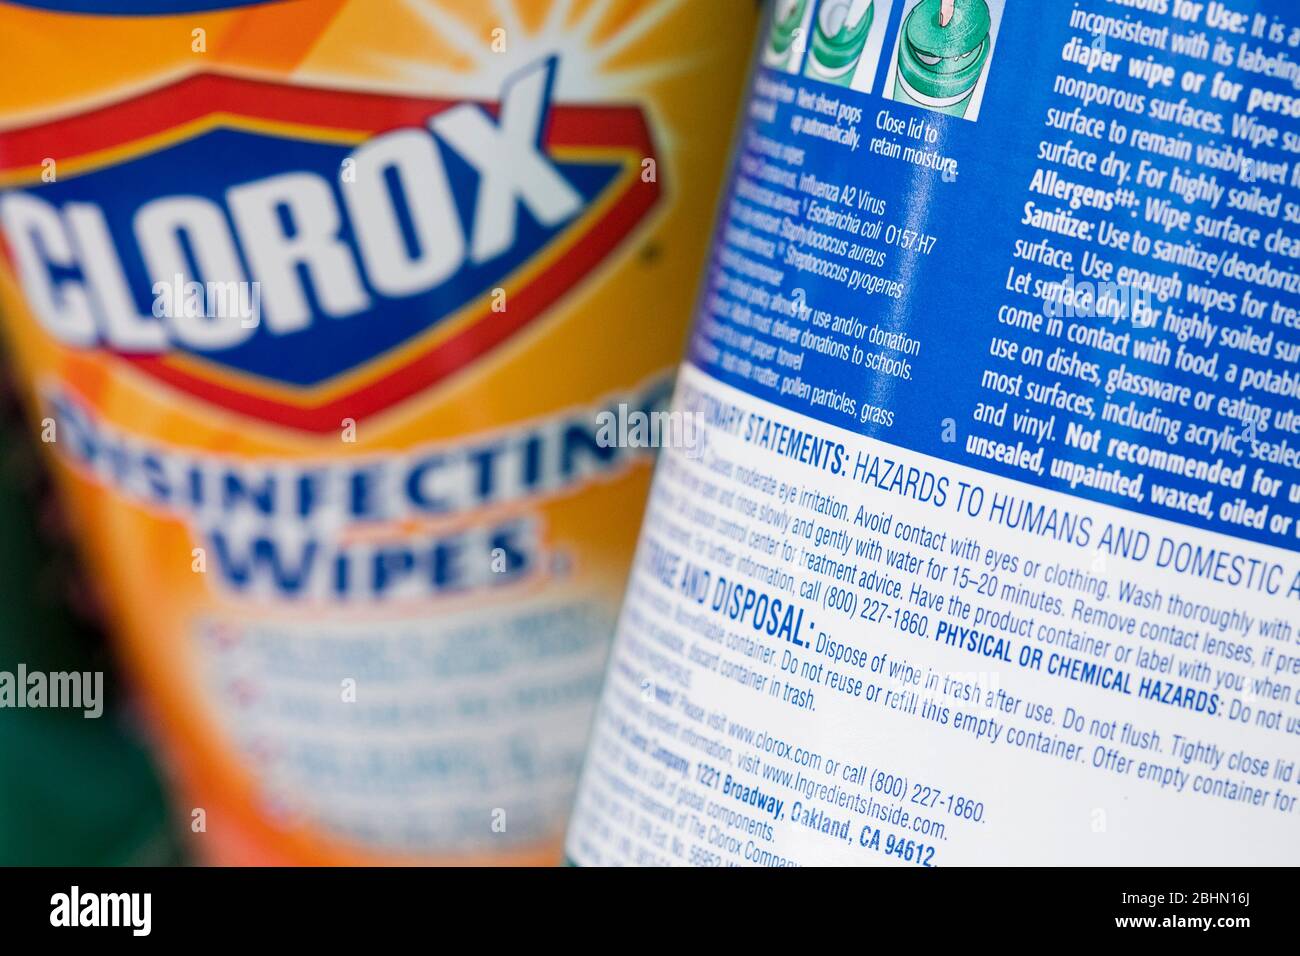 A grouping of Clorox disinfectant products with a warning that they are 'Hazards to Humans' arranged for a photograph. Stock Photo